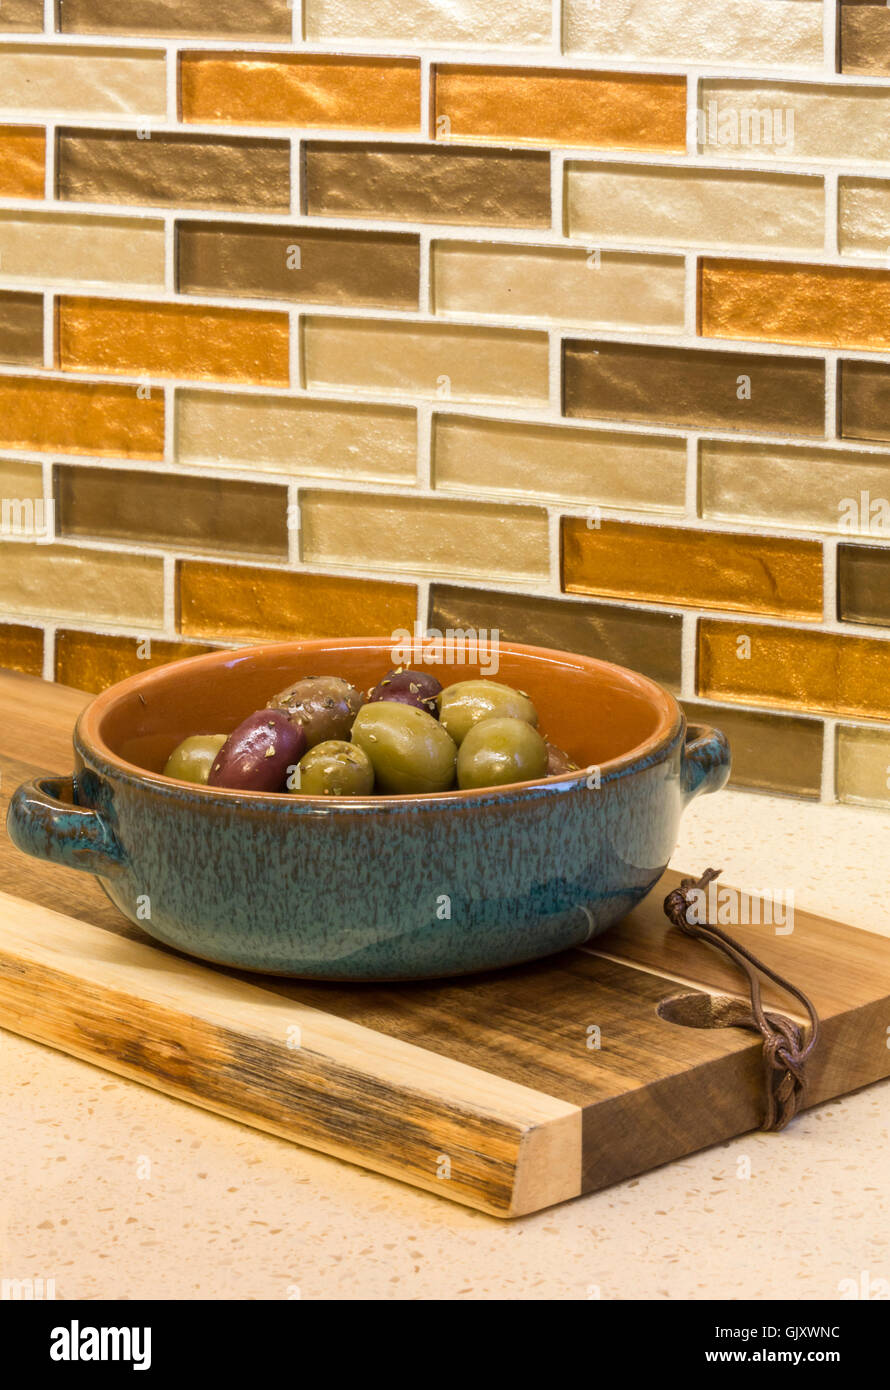 Home kitchen interior detail. Olives appetizers in ceramic serving dish on countertop with glass mosaic tile backsplash. Stock Photo